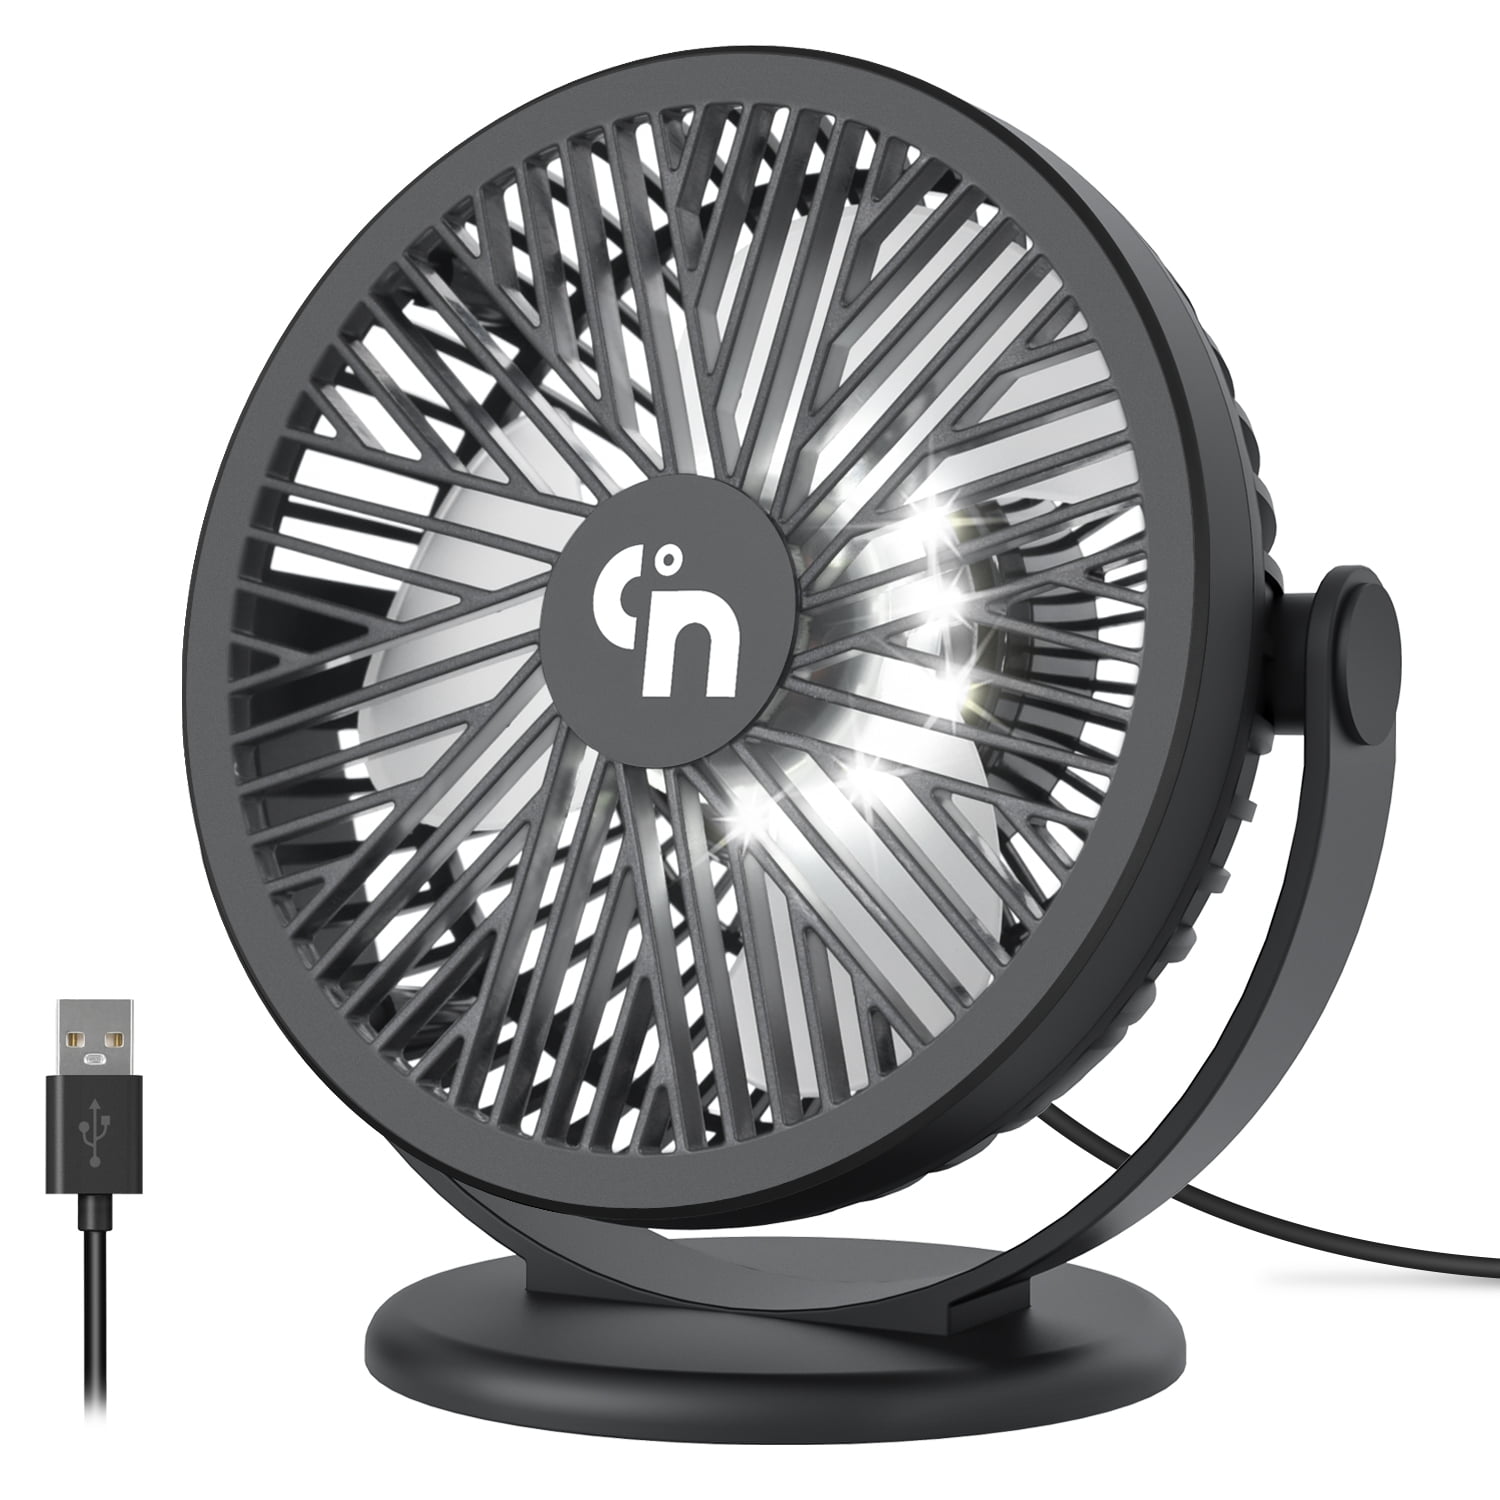 Clip on Fan with 3 Speeds Personal Portable Cooling Fan for Car Stroller Office Outdoor 360° Adjustable Head Black Rechargeable Battery Operated Mini USB Fan and Table Fan H+LUX Small Desk Fan